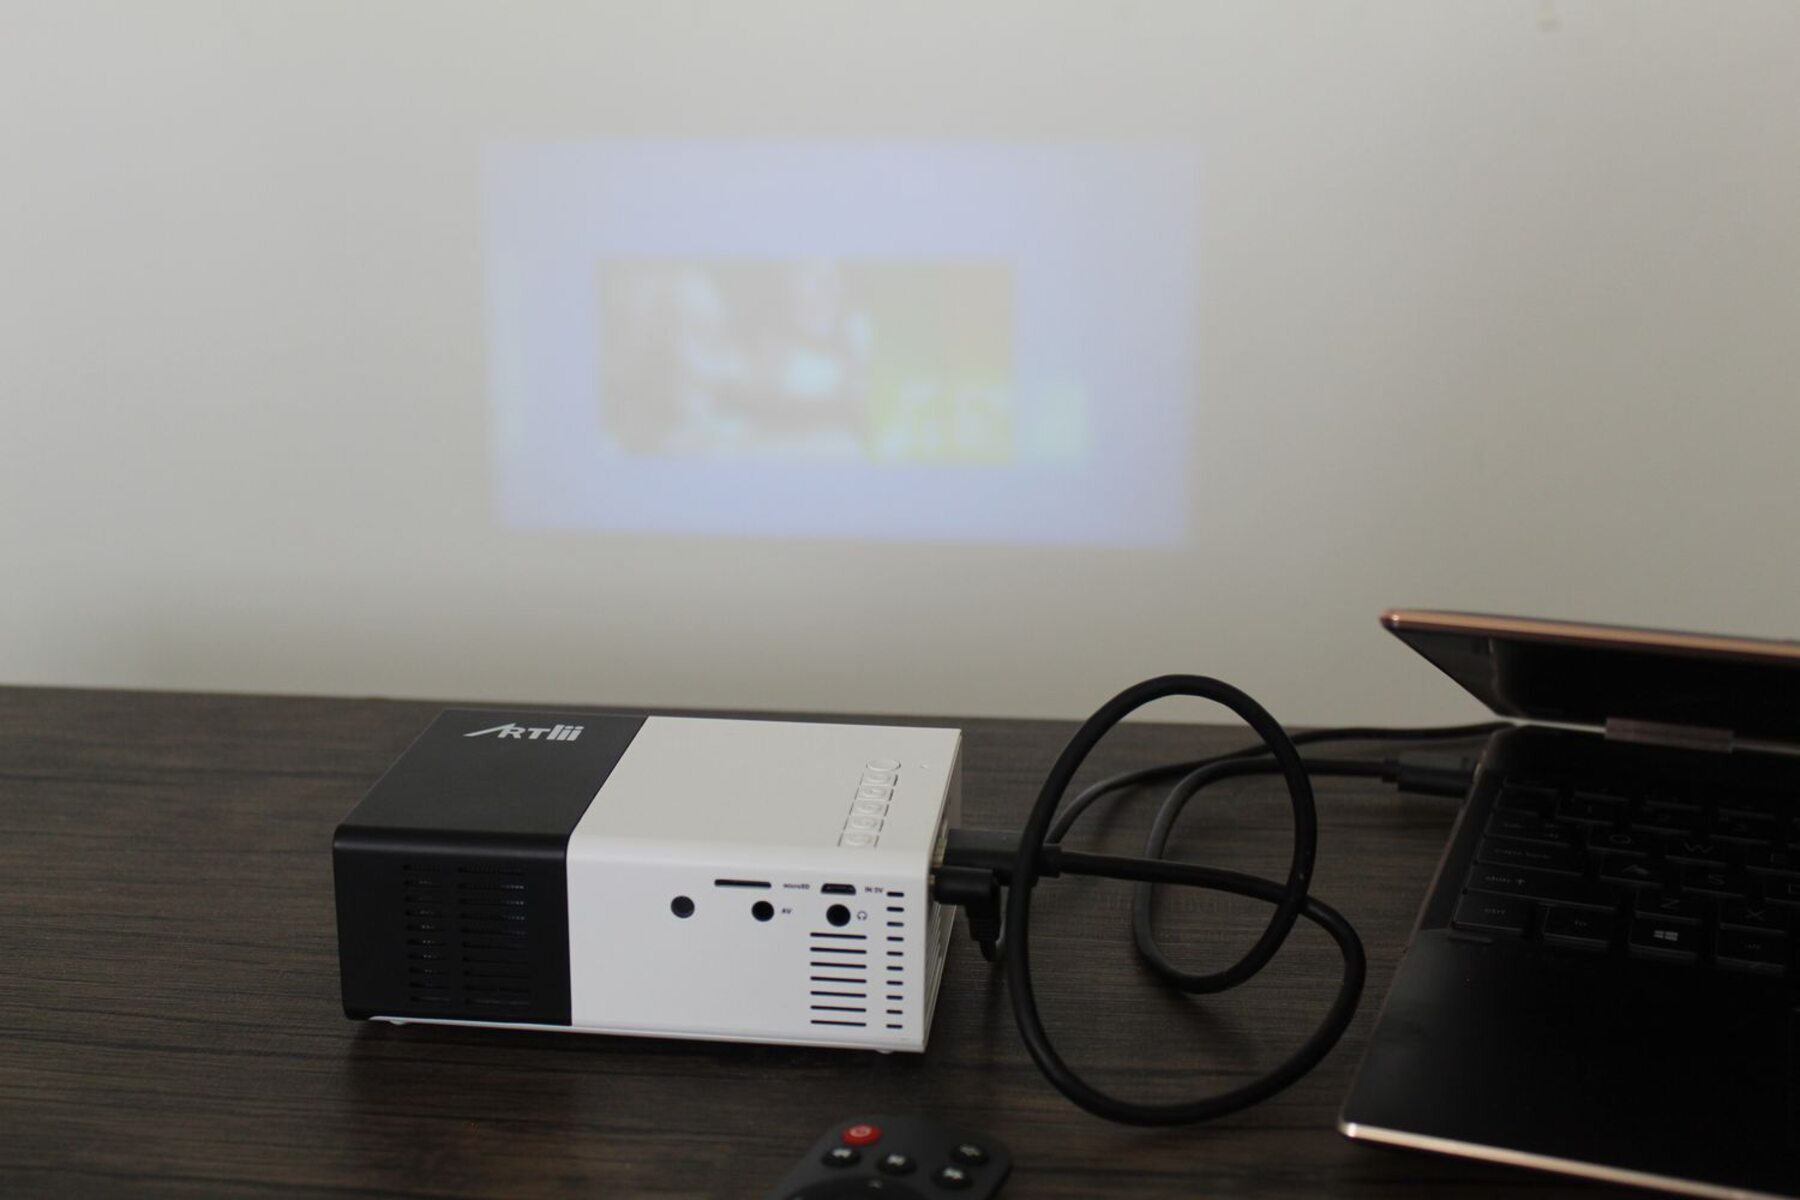 How Do You Display A Laptop Screen Image Through A Connected Projector?